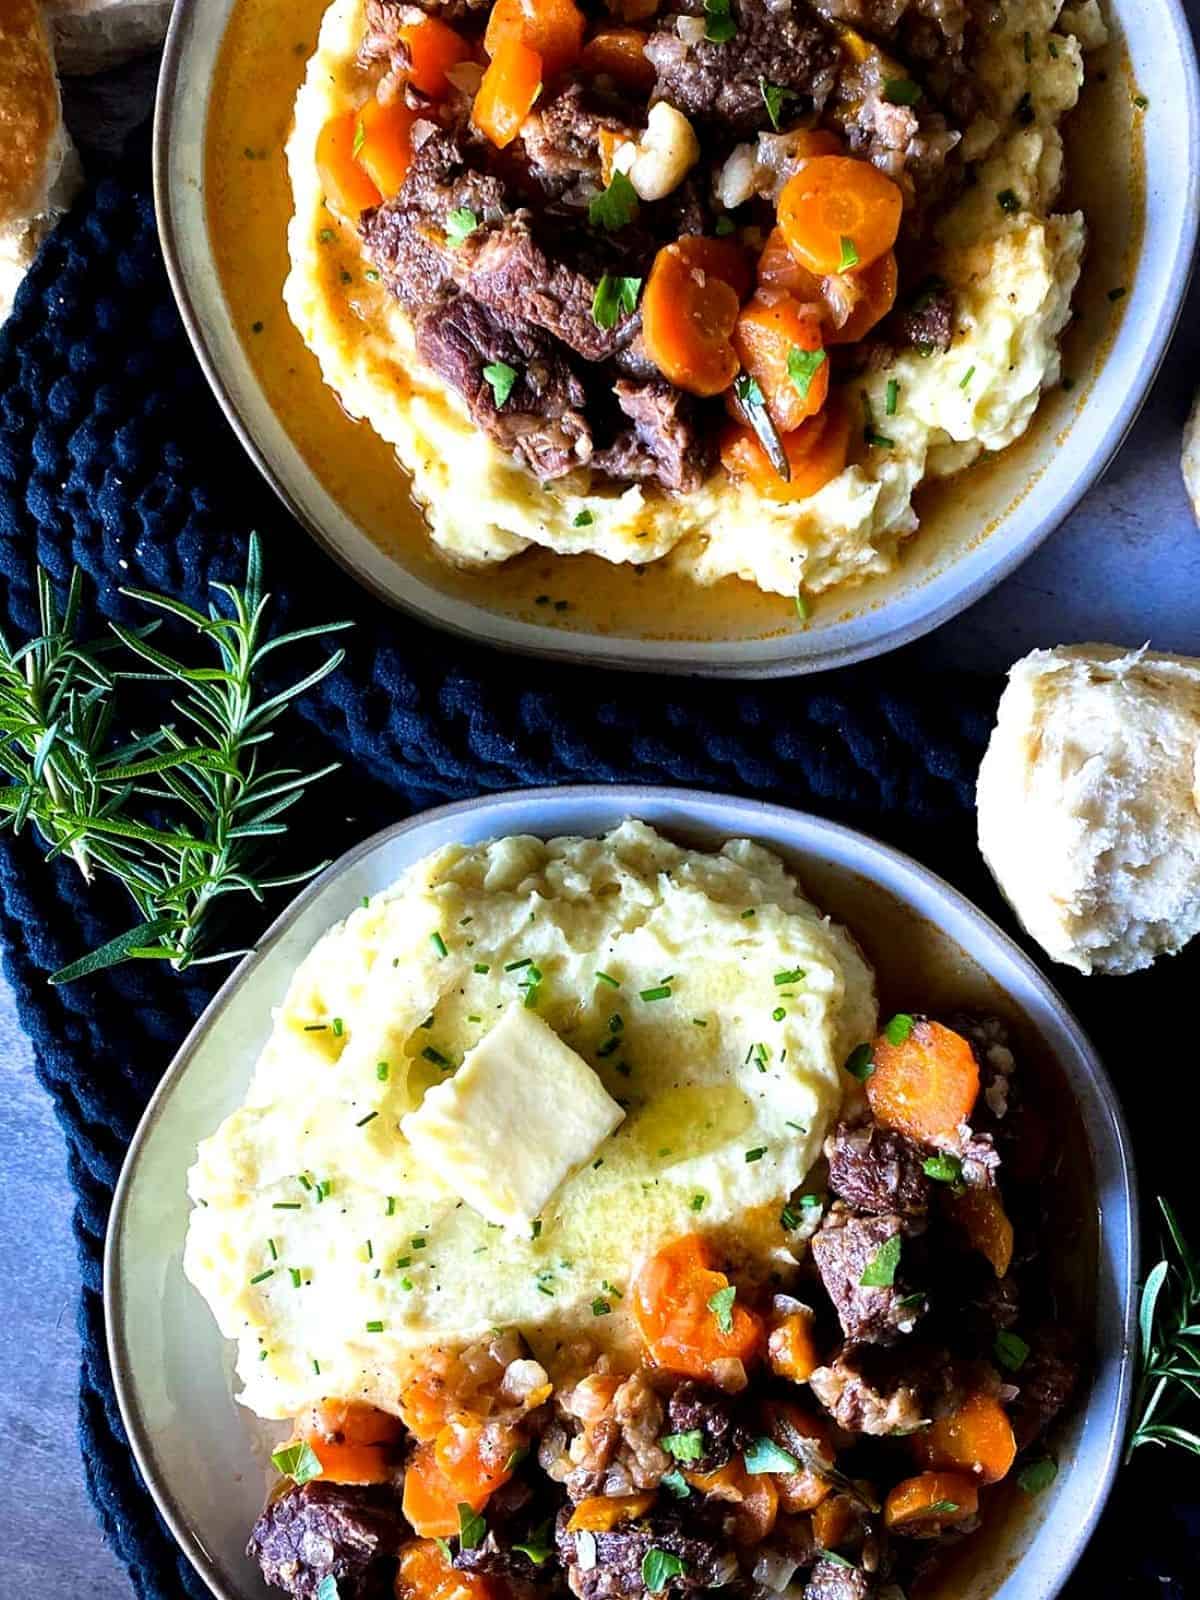 Short rib stew with vegetables and mashed potatoes.